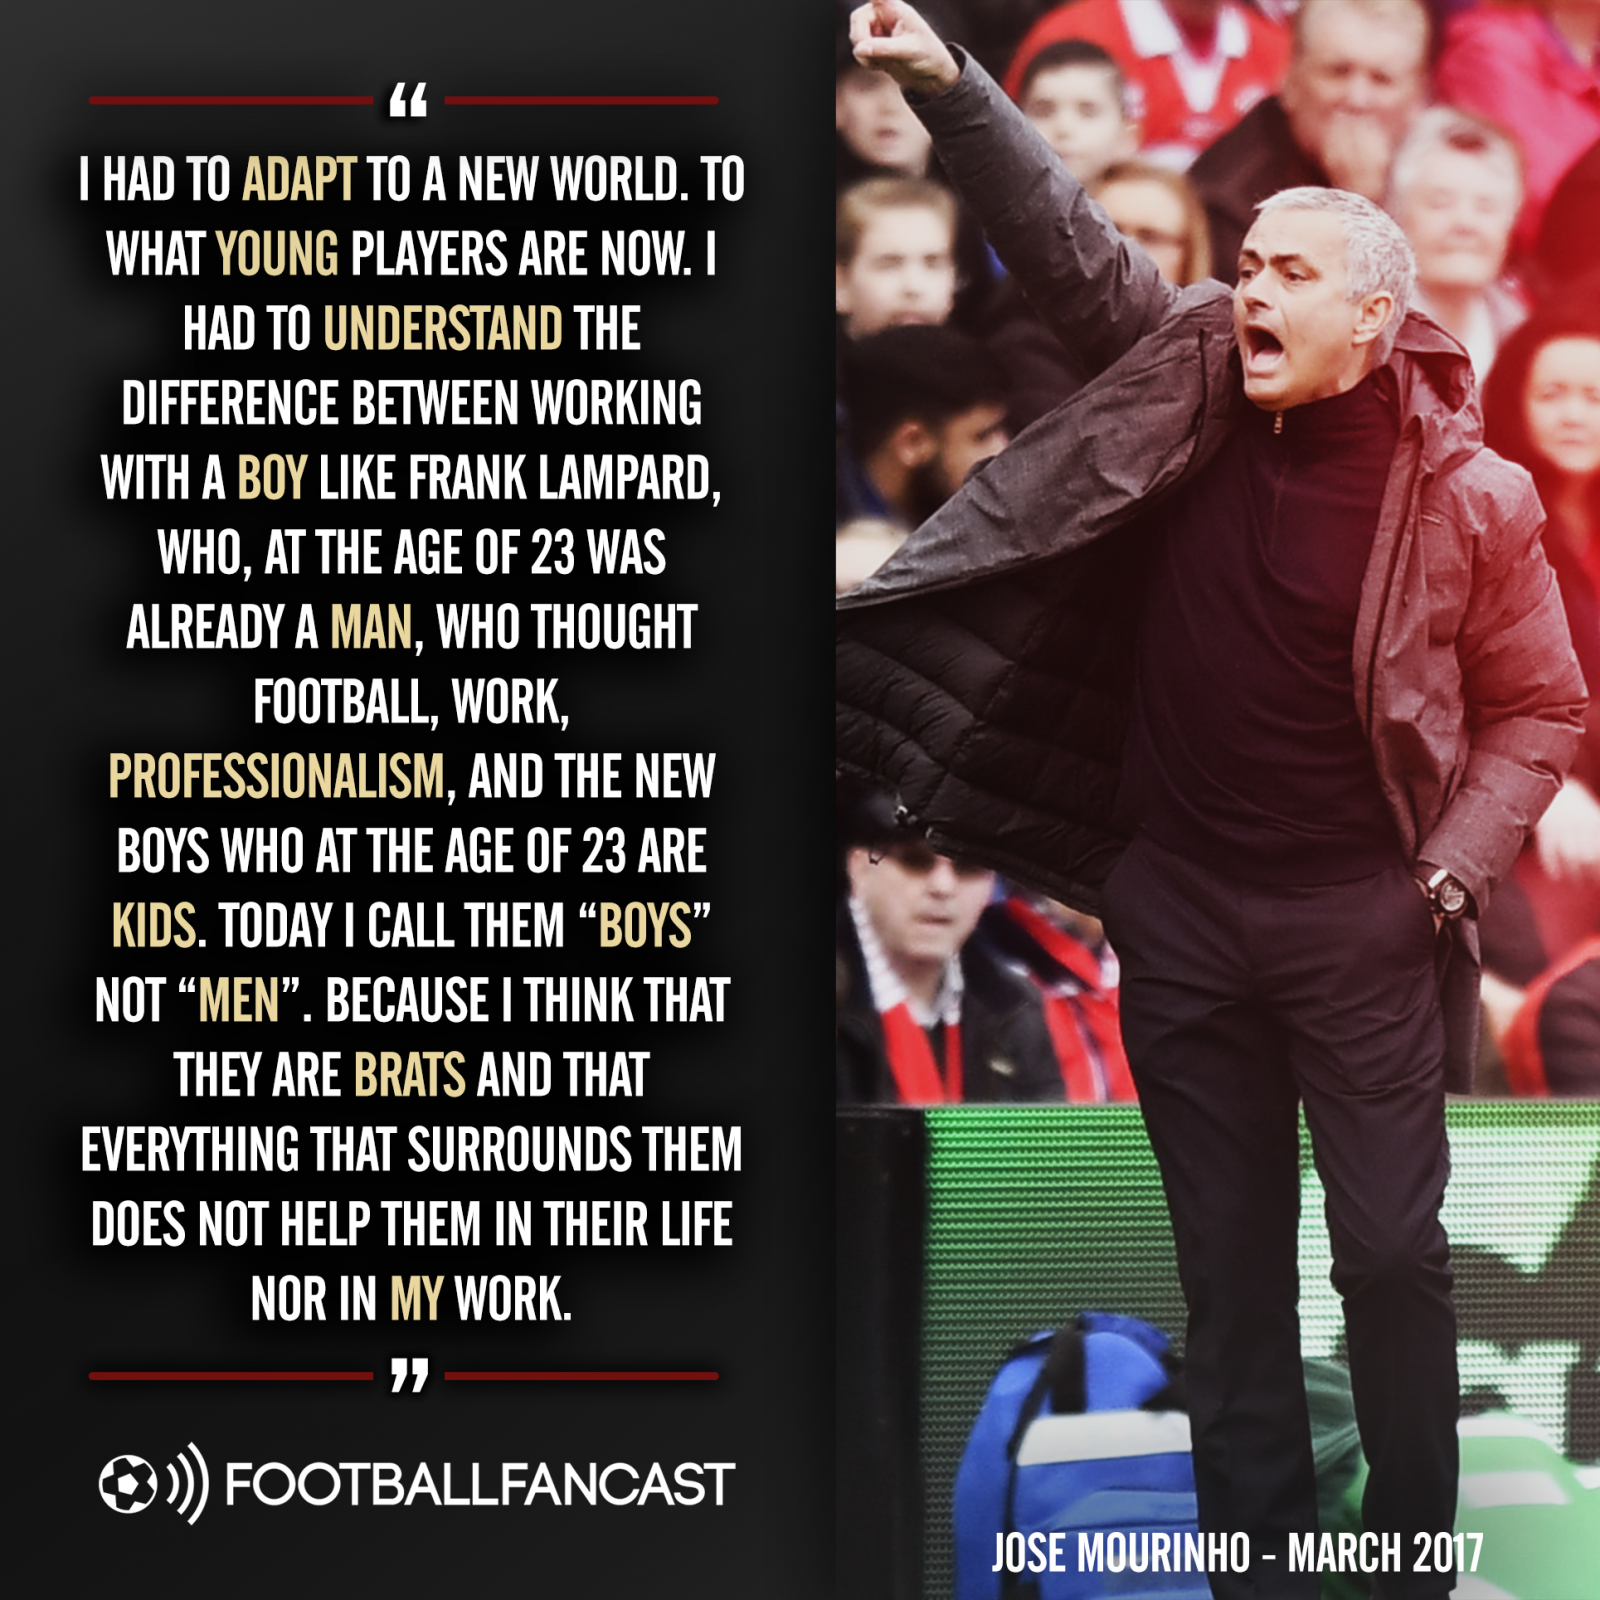 Jose Mourinho's brats quote from March 2017